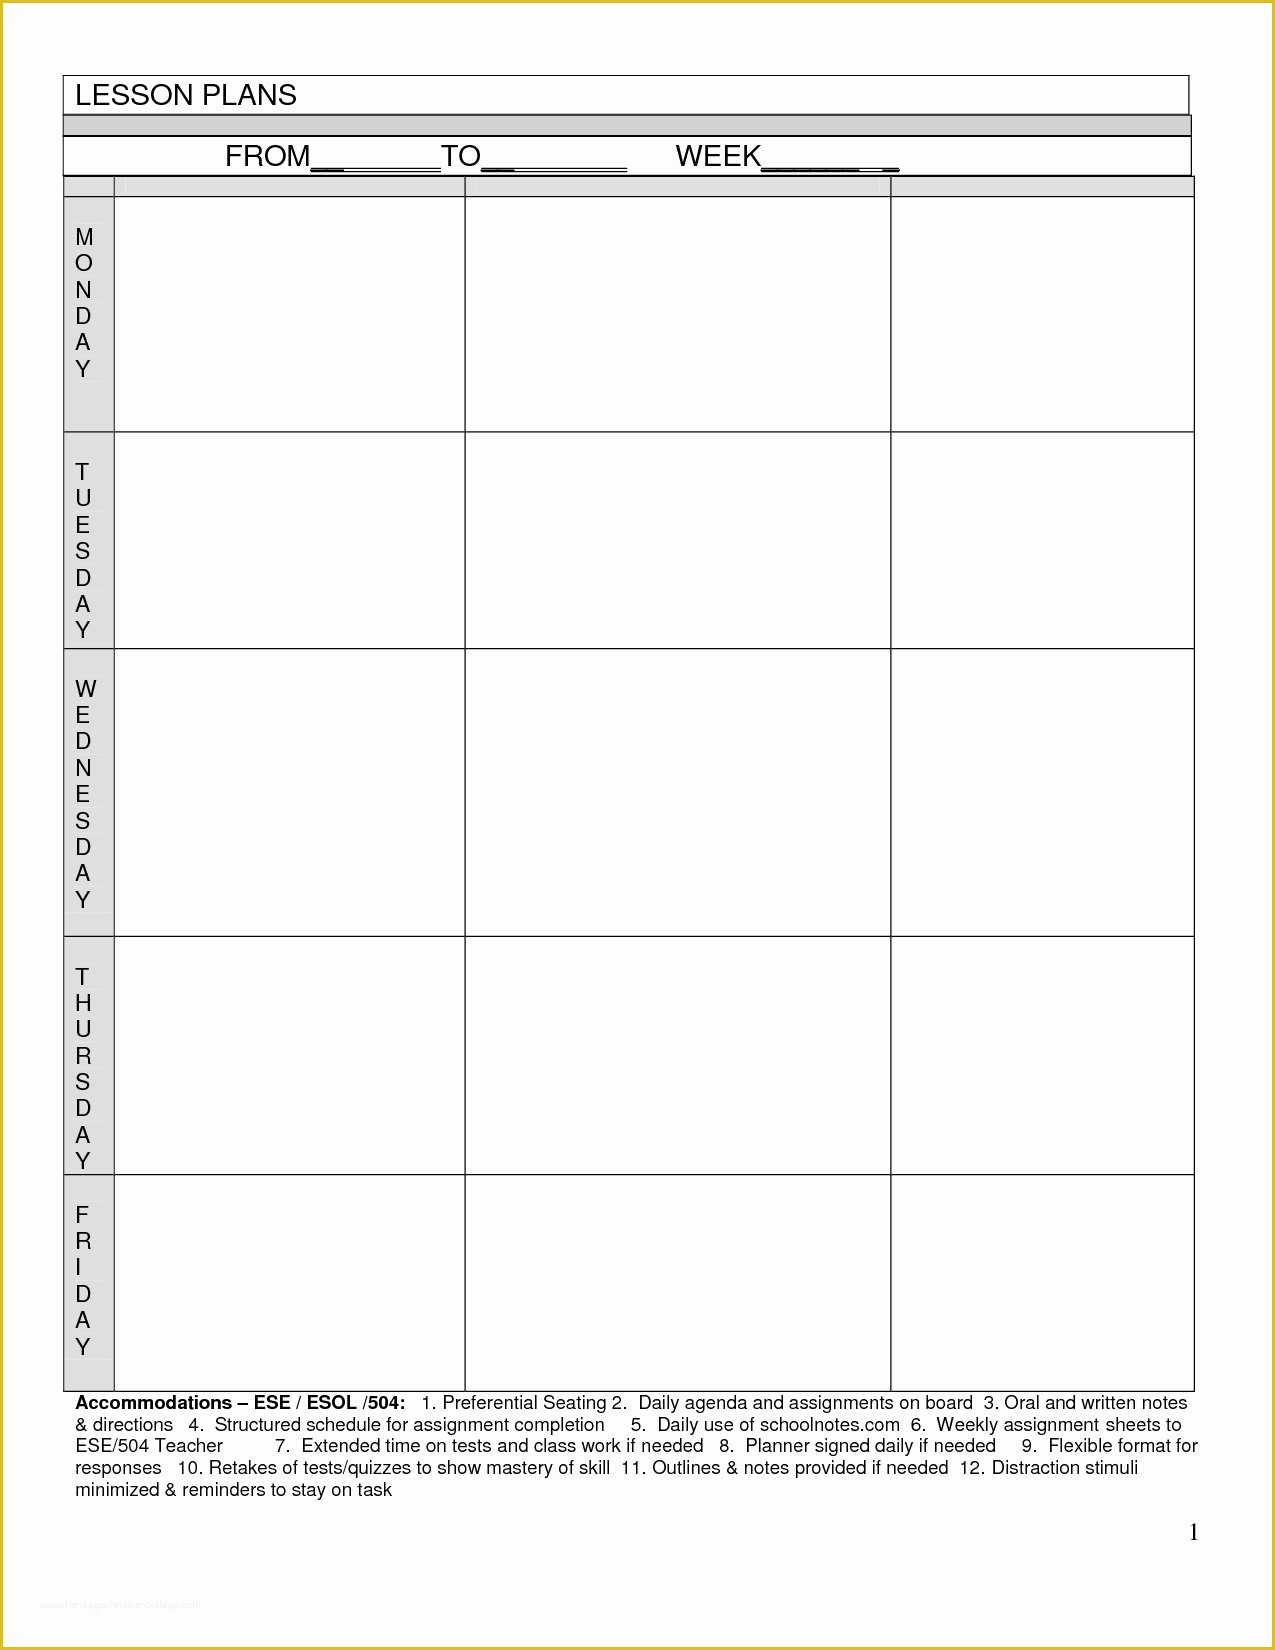 Free Printable Lesson Plan Template Of Blank Lesson Plans for Teachers